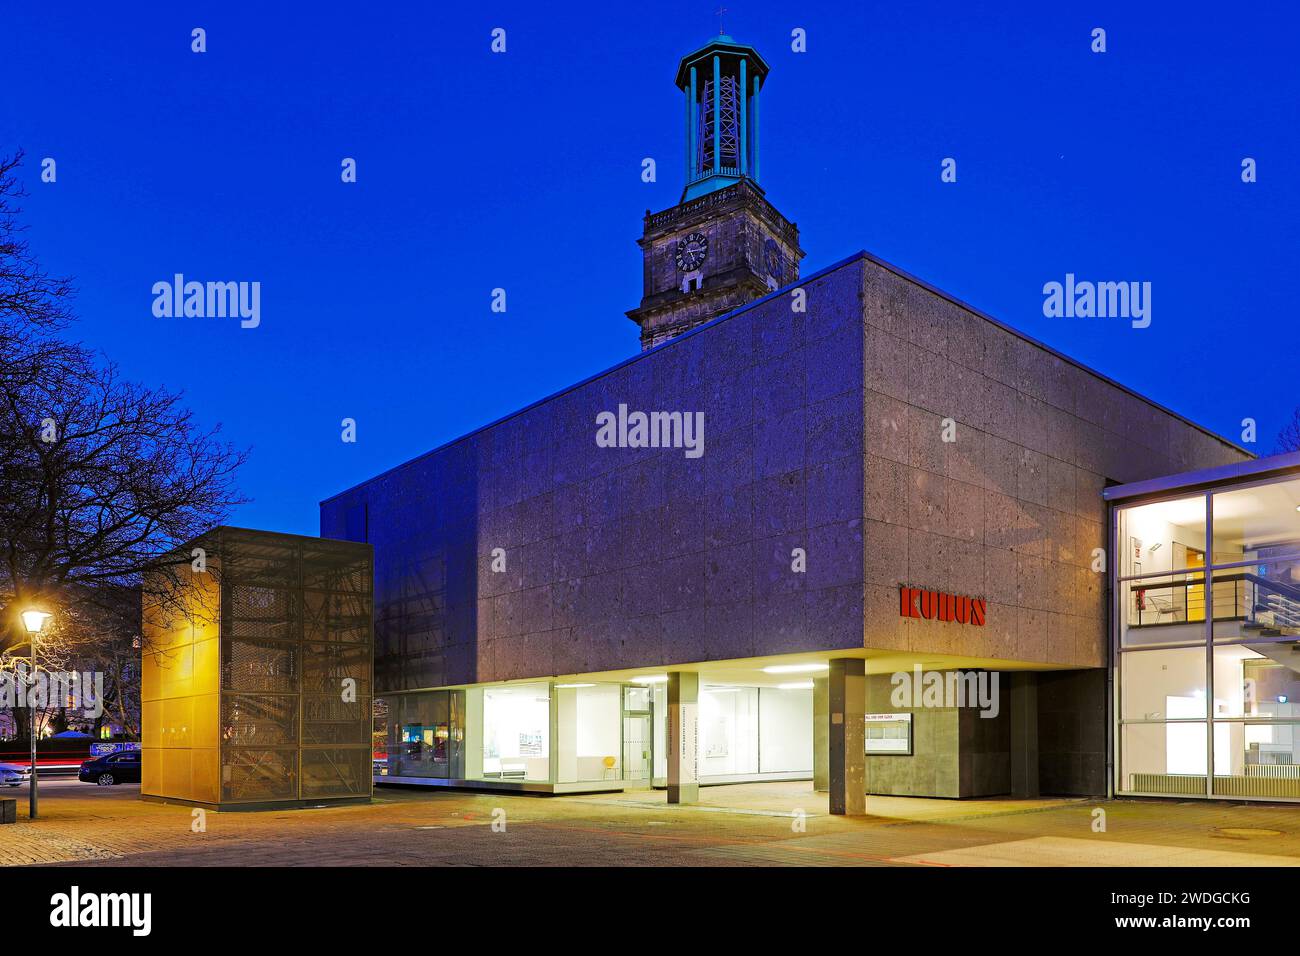 Municipal Gallery KUBUS in the evening with the Aegidienkirche, Gallery at Theodor-Lessing-Platz, Hanover, Lower Saxony, Germany Stock Photo